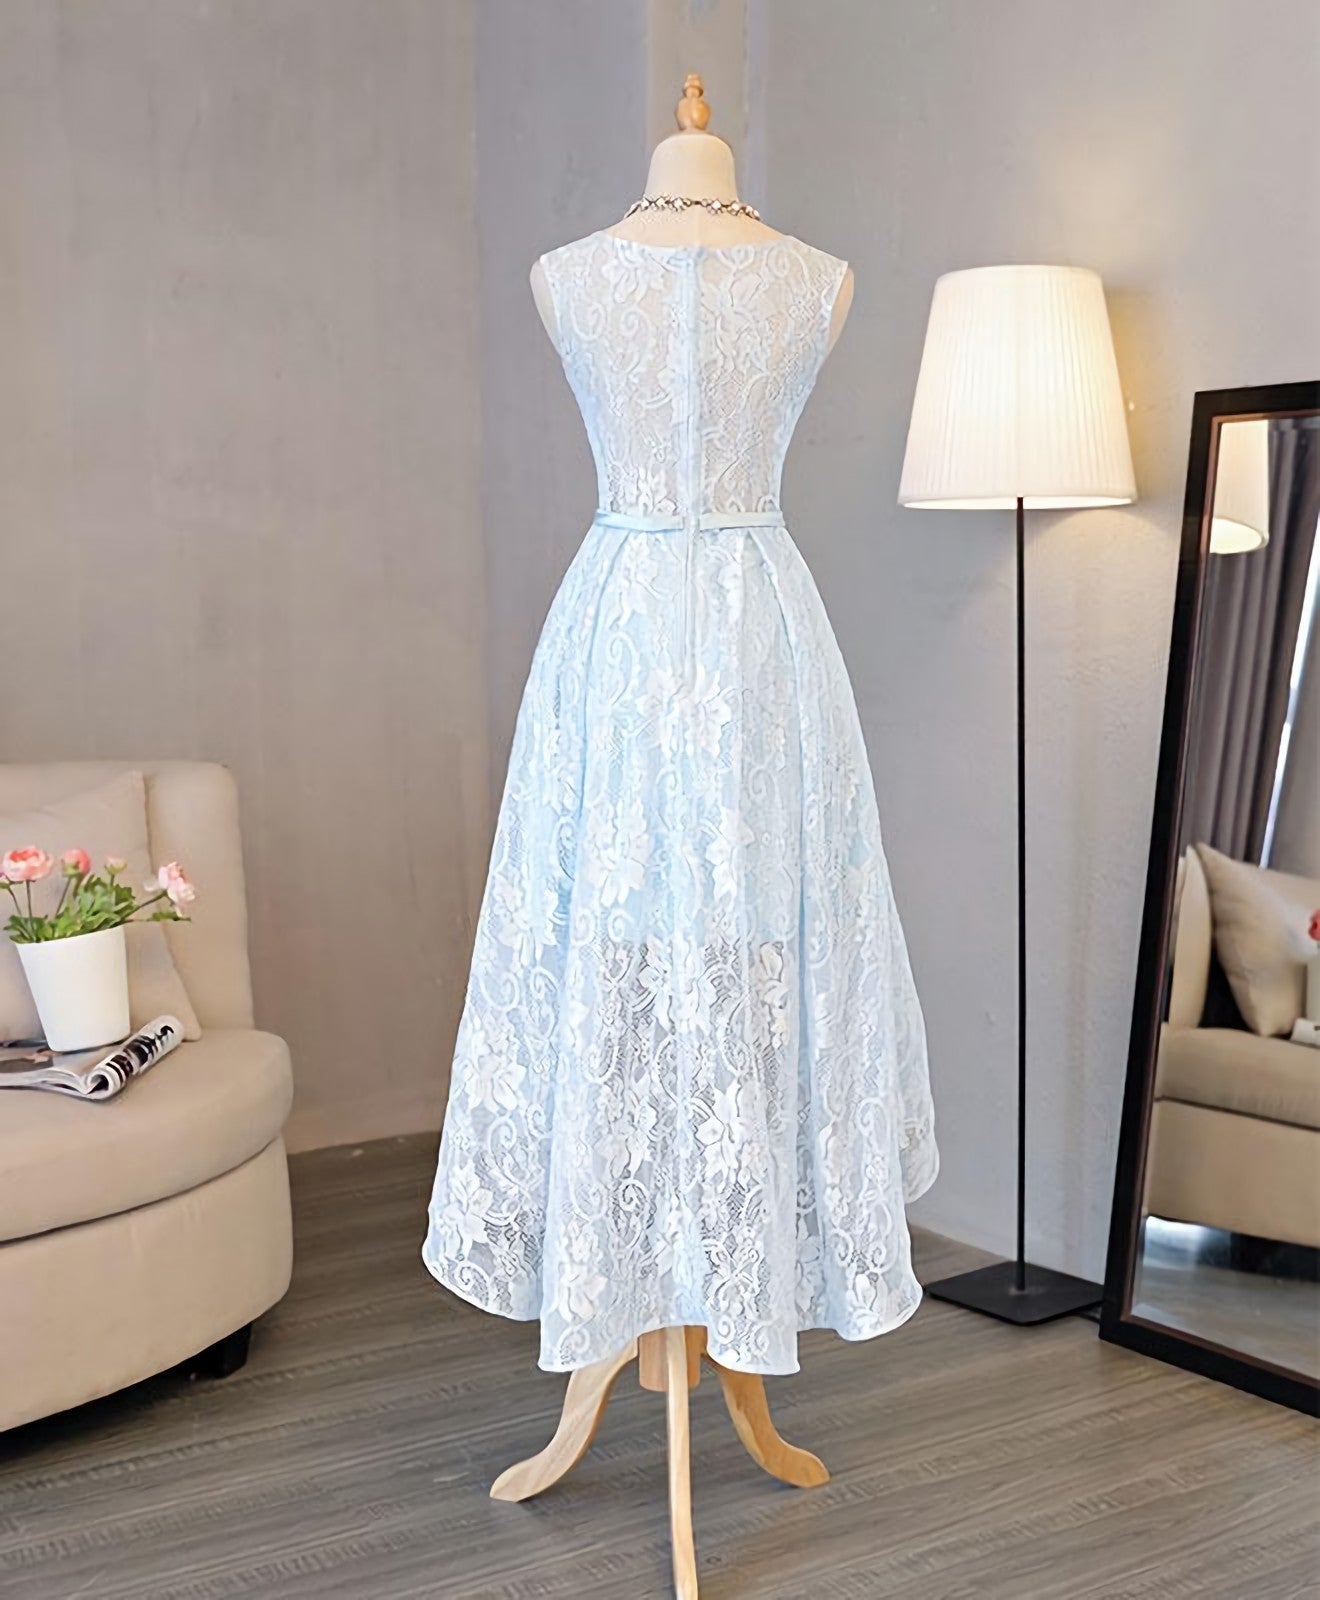 Party Dresses Teen, Light Blue Lace High Low Prom Dress, Homecoming Dress